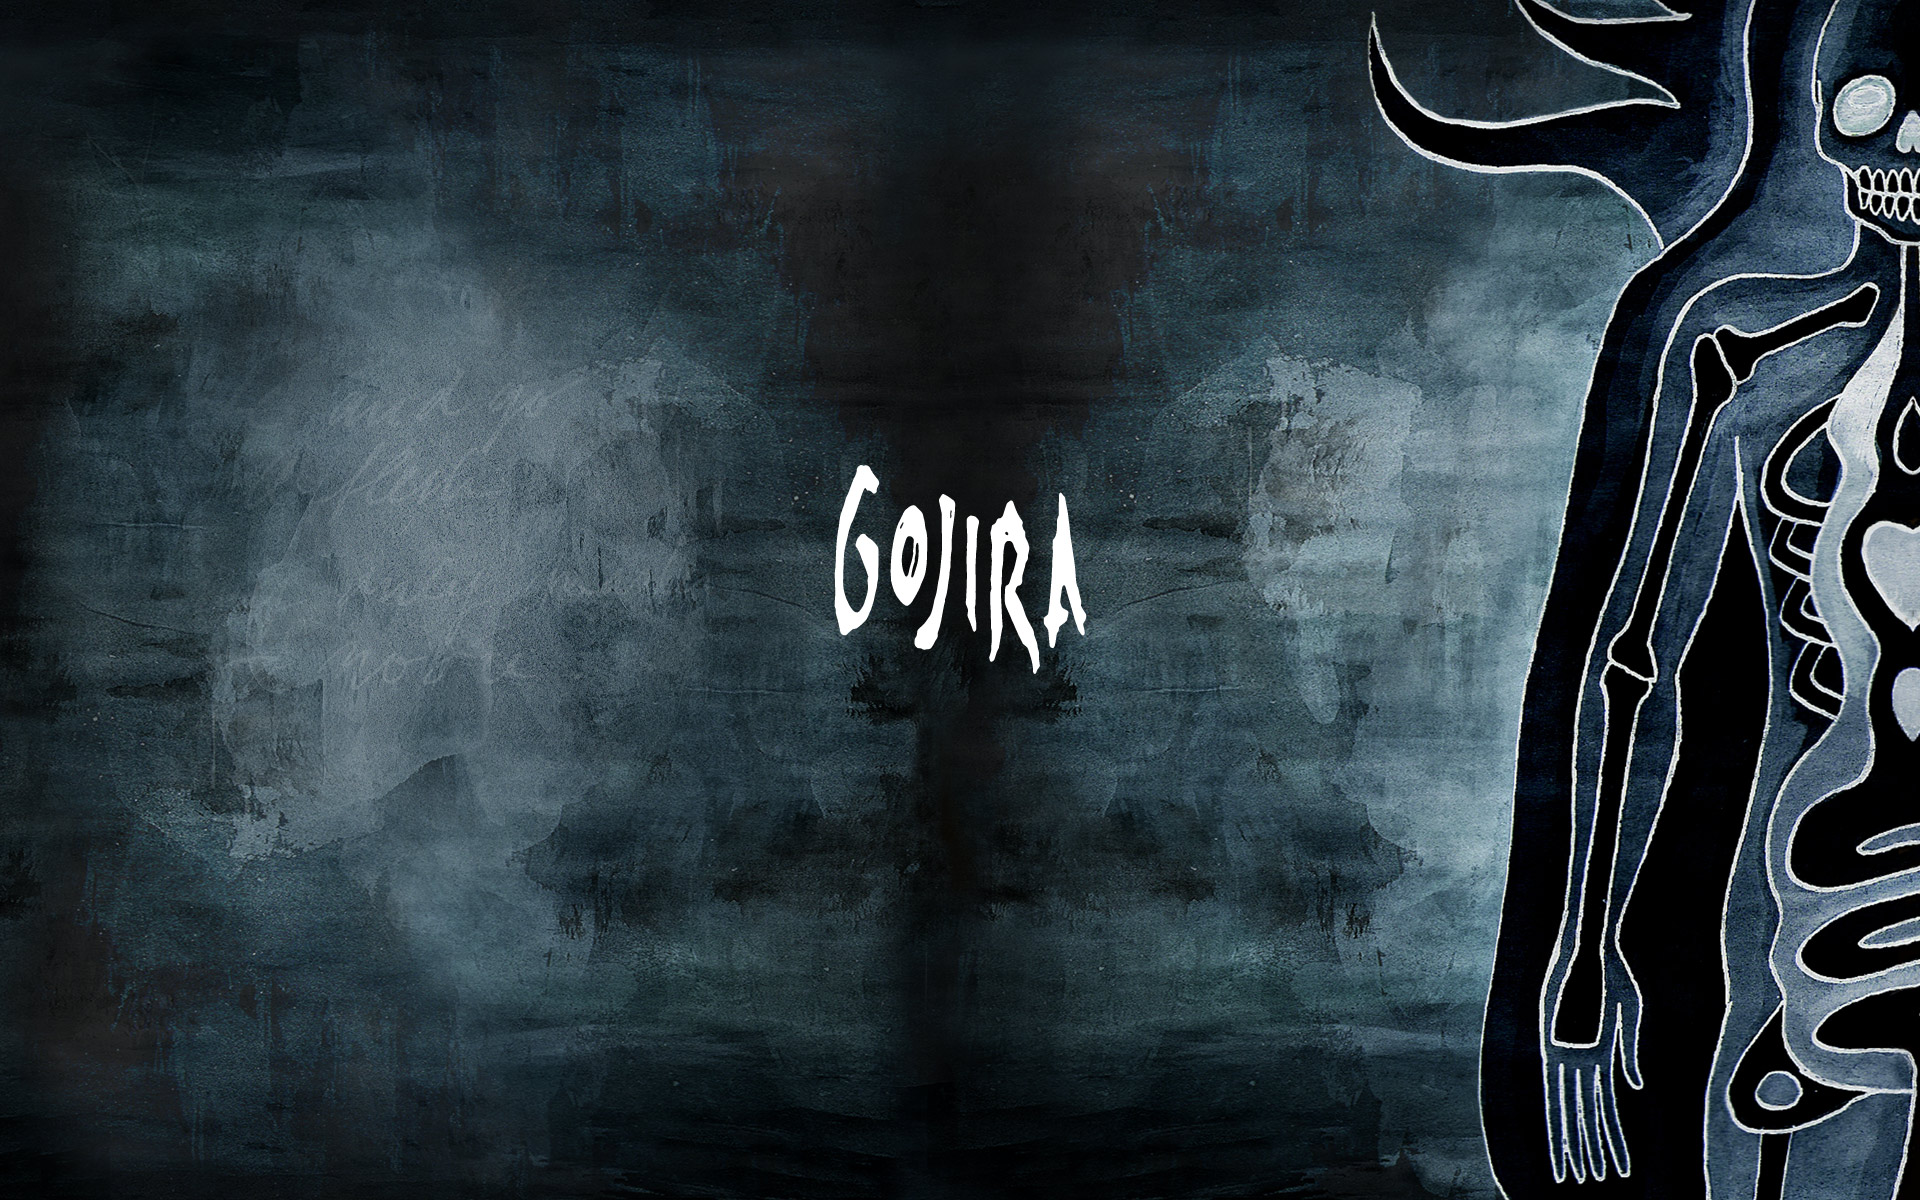 HD desktop wallpaper with an artistic dark representation of Gojira featuring abstract imagery and the band's name in white.